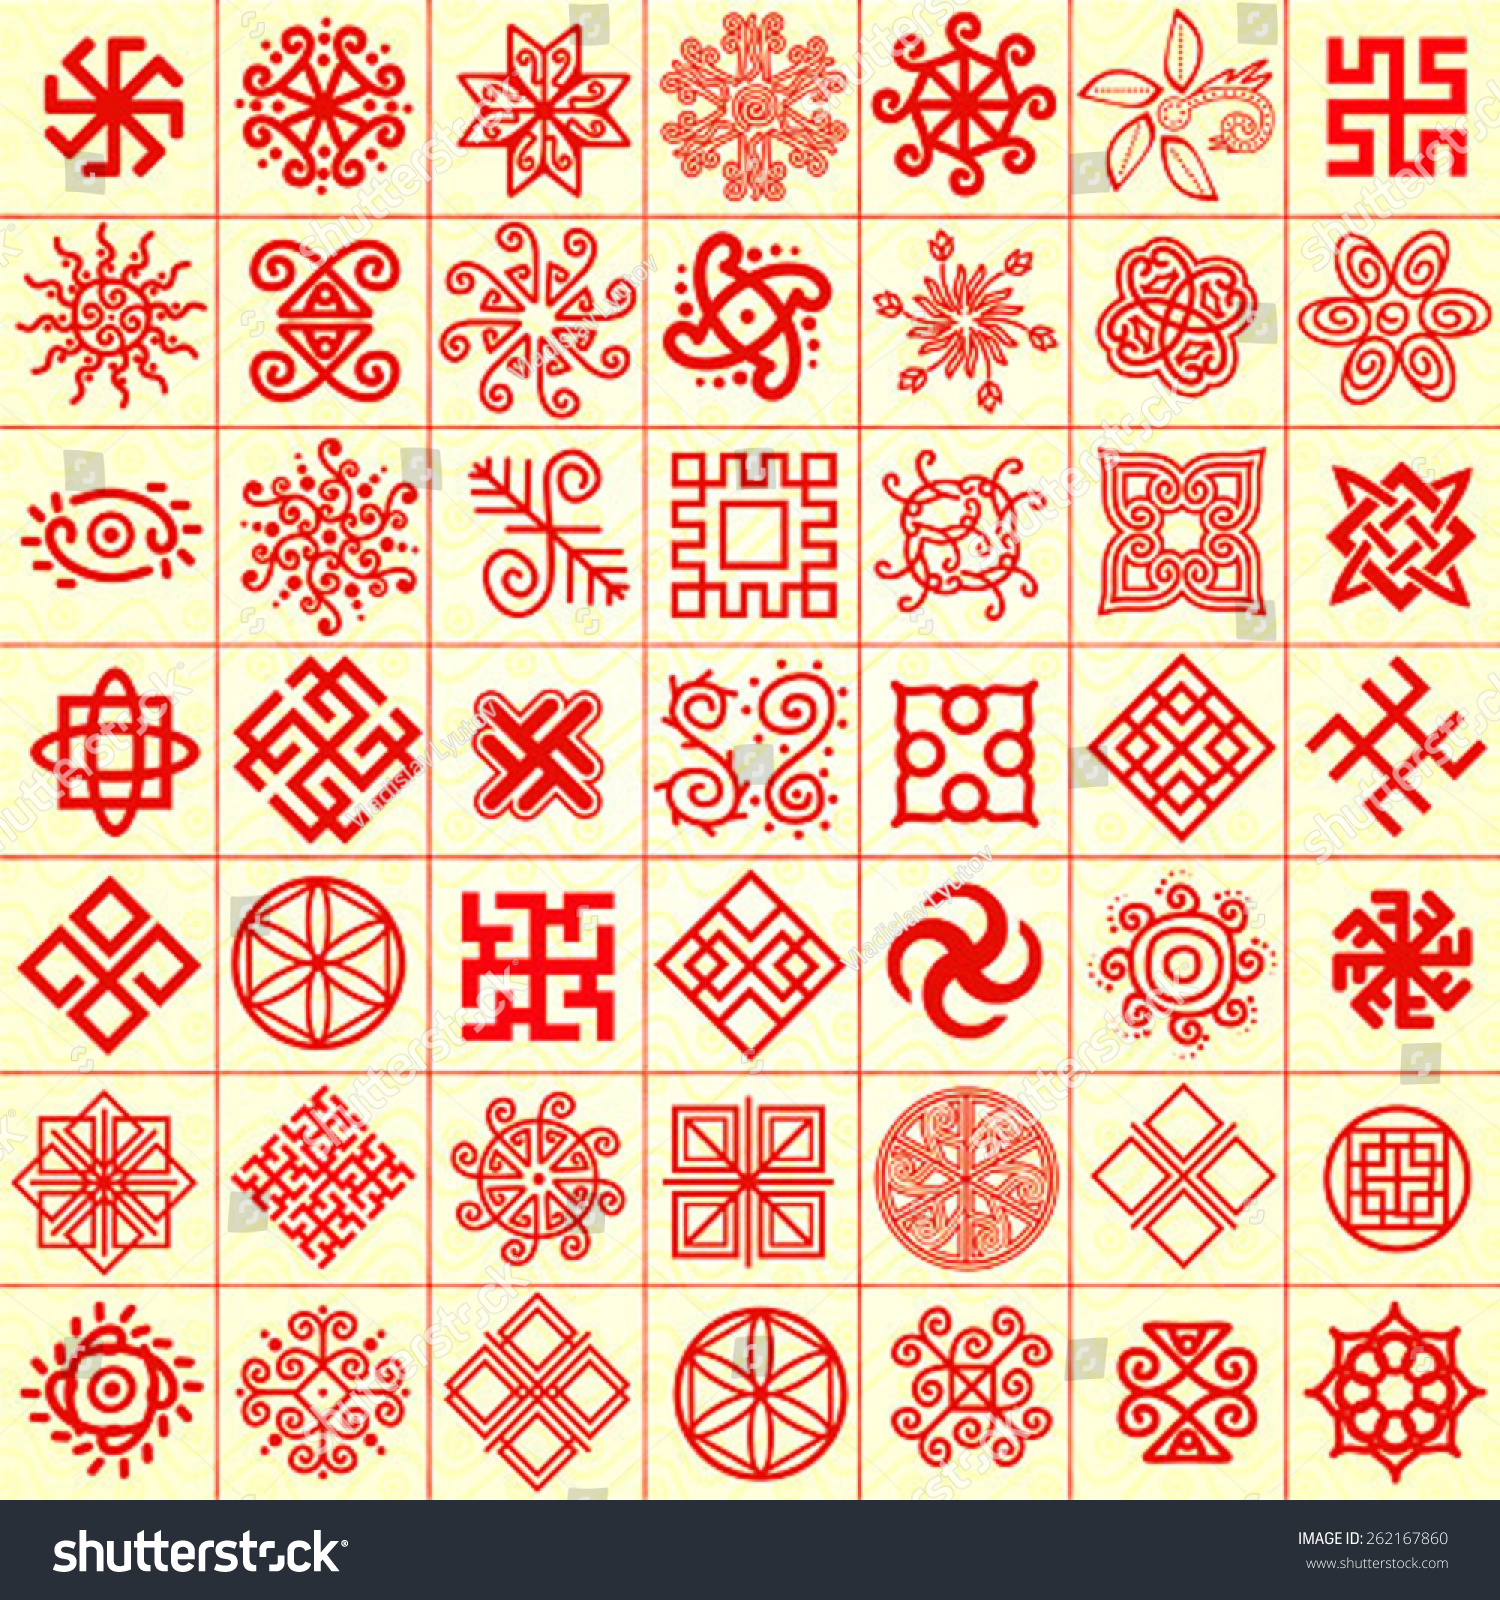 Ethnic geometric signs set. Set of icons with Slavic pagan symbols for your design. Vector illustration #262167860